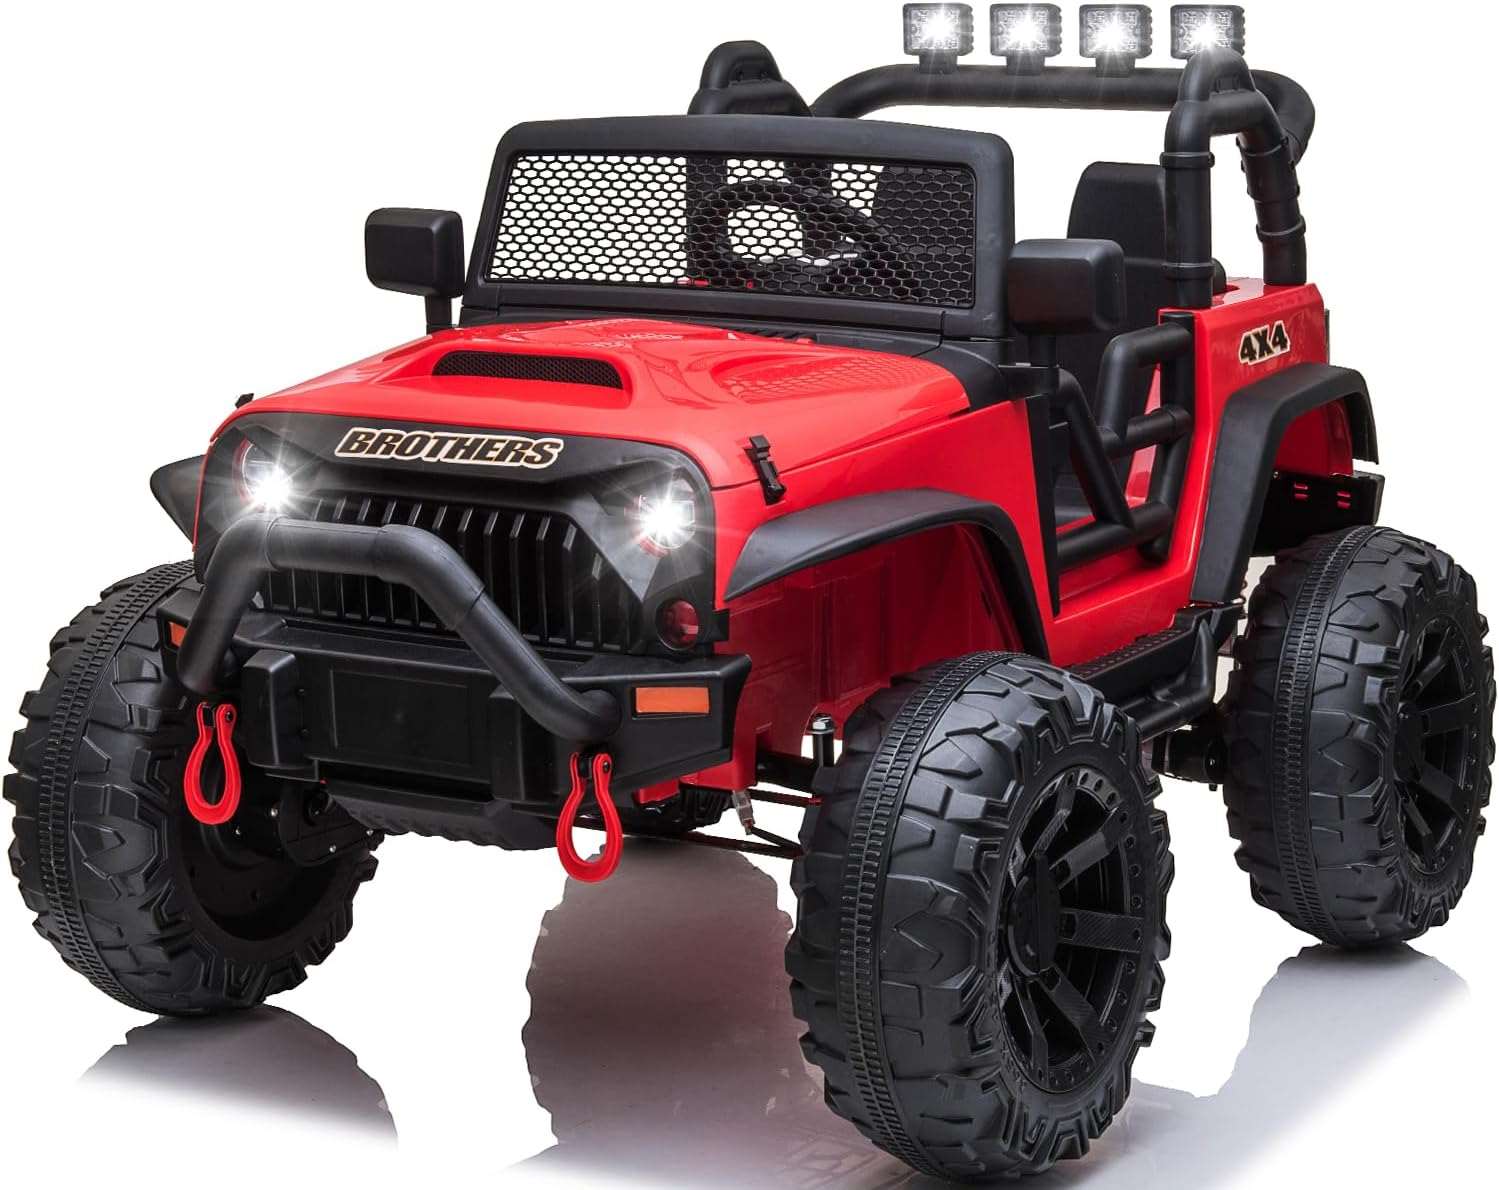 24v Ride on Car with Remote Control, 2 Seater Battery Powered Cars, 4x200w Electric Kids Ride on Truck Spring Suspension - Cykapu